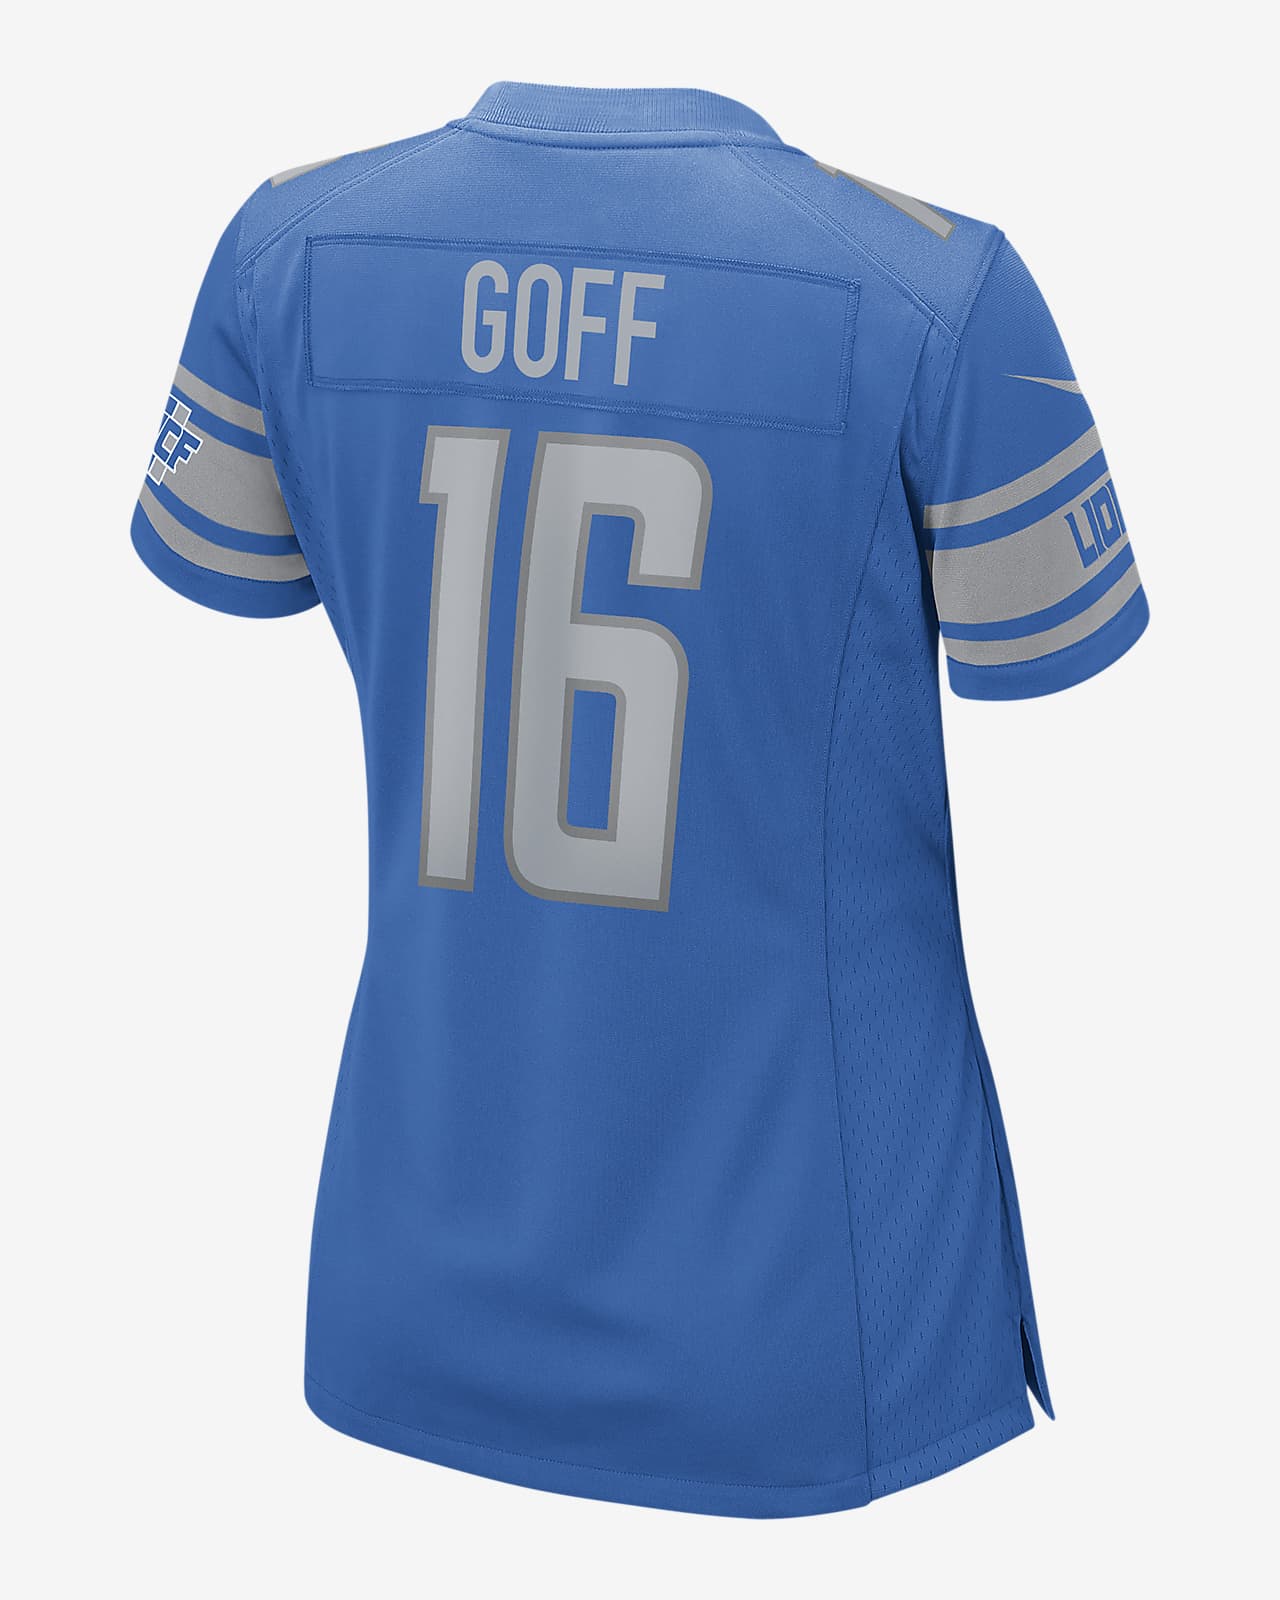 NFL Detroit Lions (Jared Goff) Women's Game Football Jersey